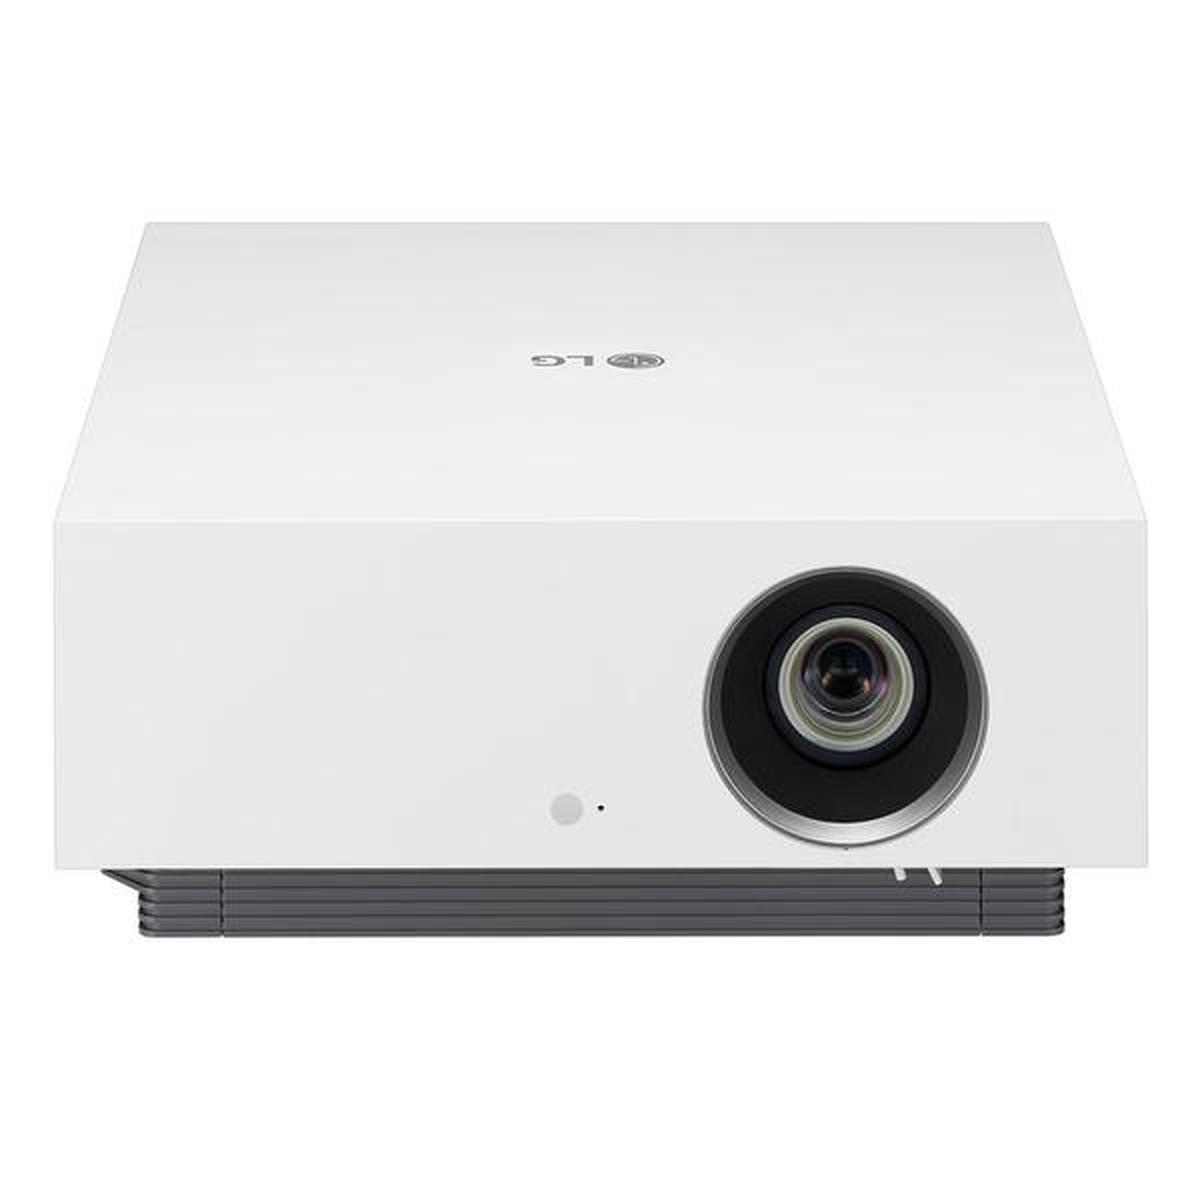 LG CineBeam HU810P projector: A little expensive, but strives for perfection